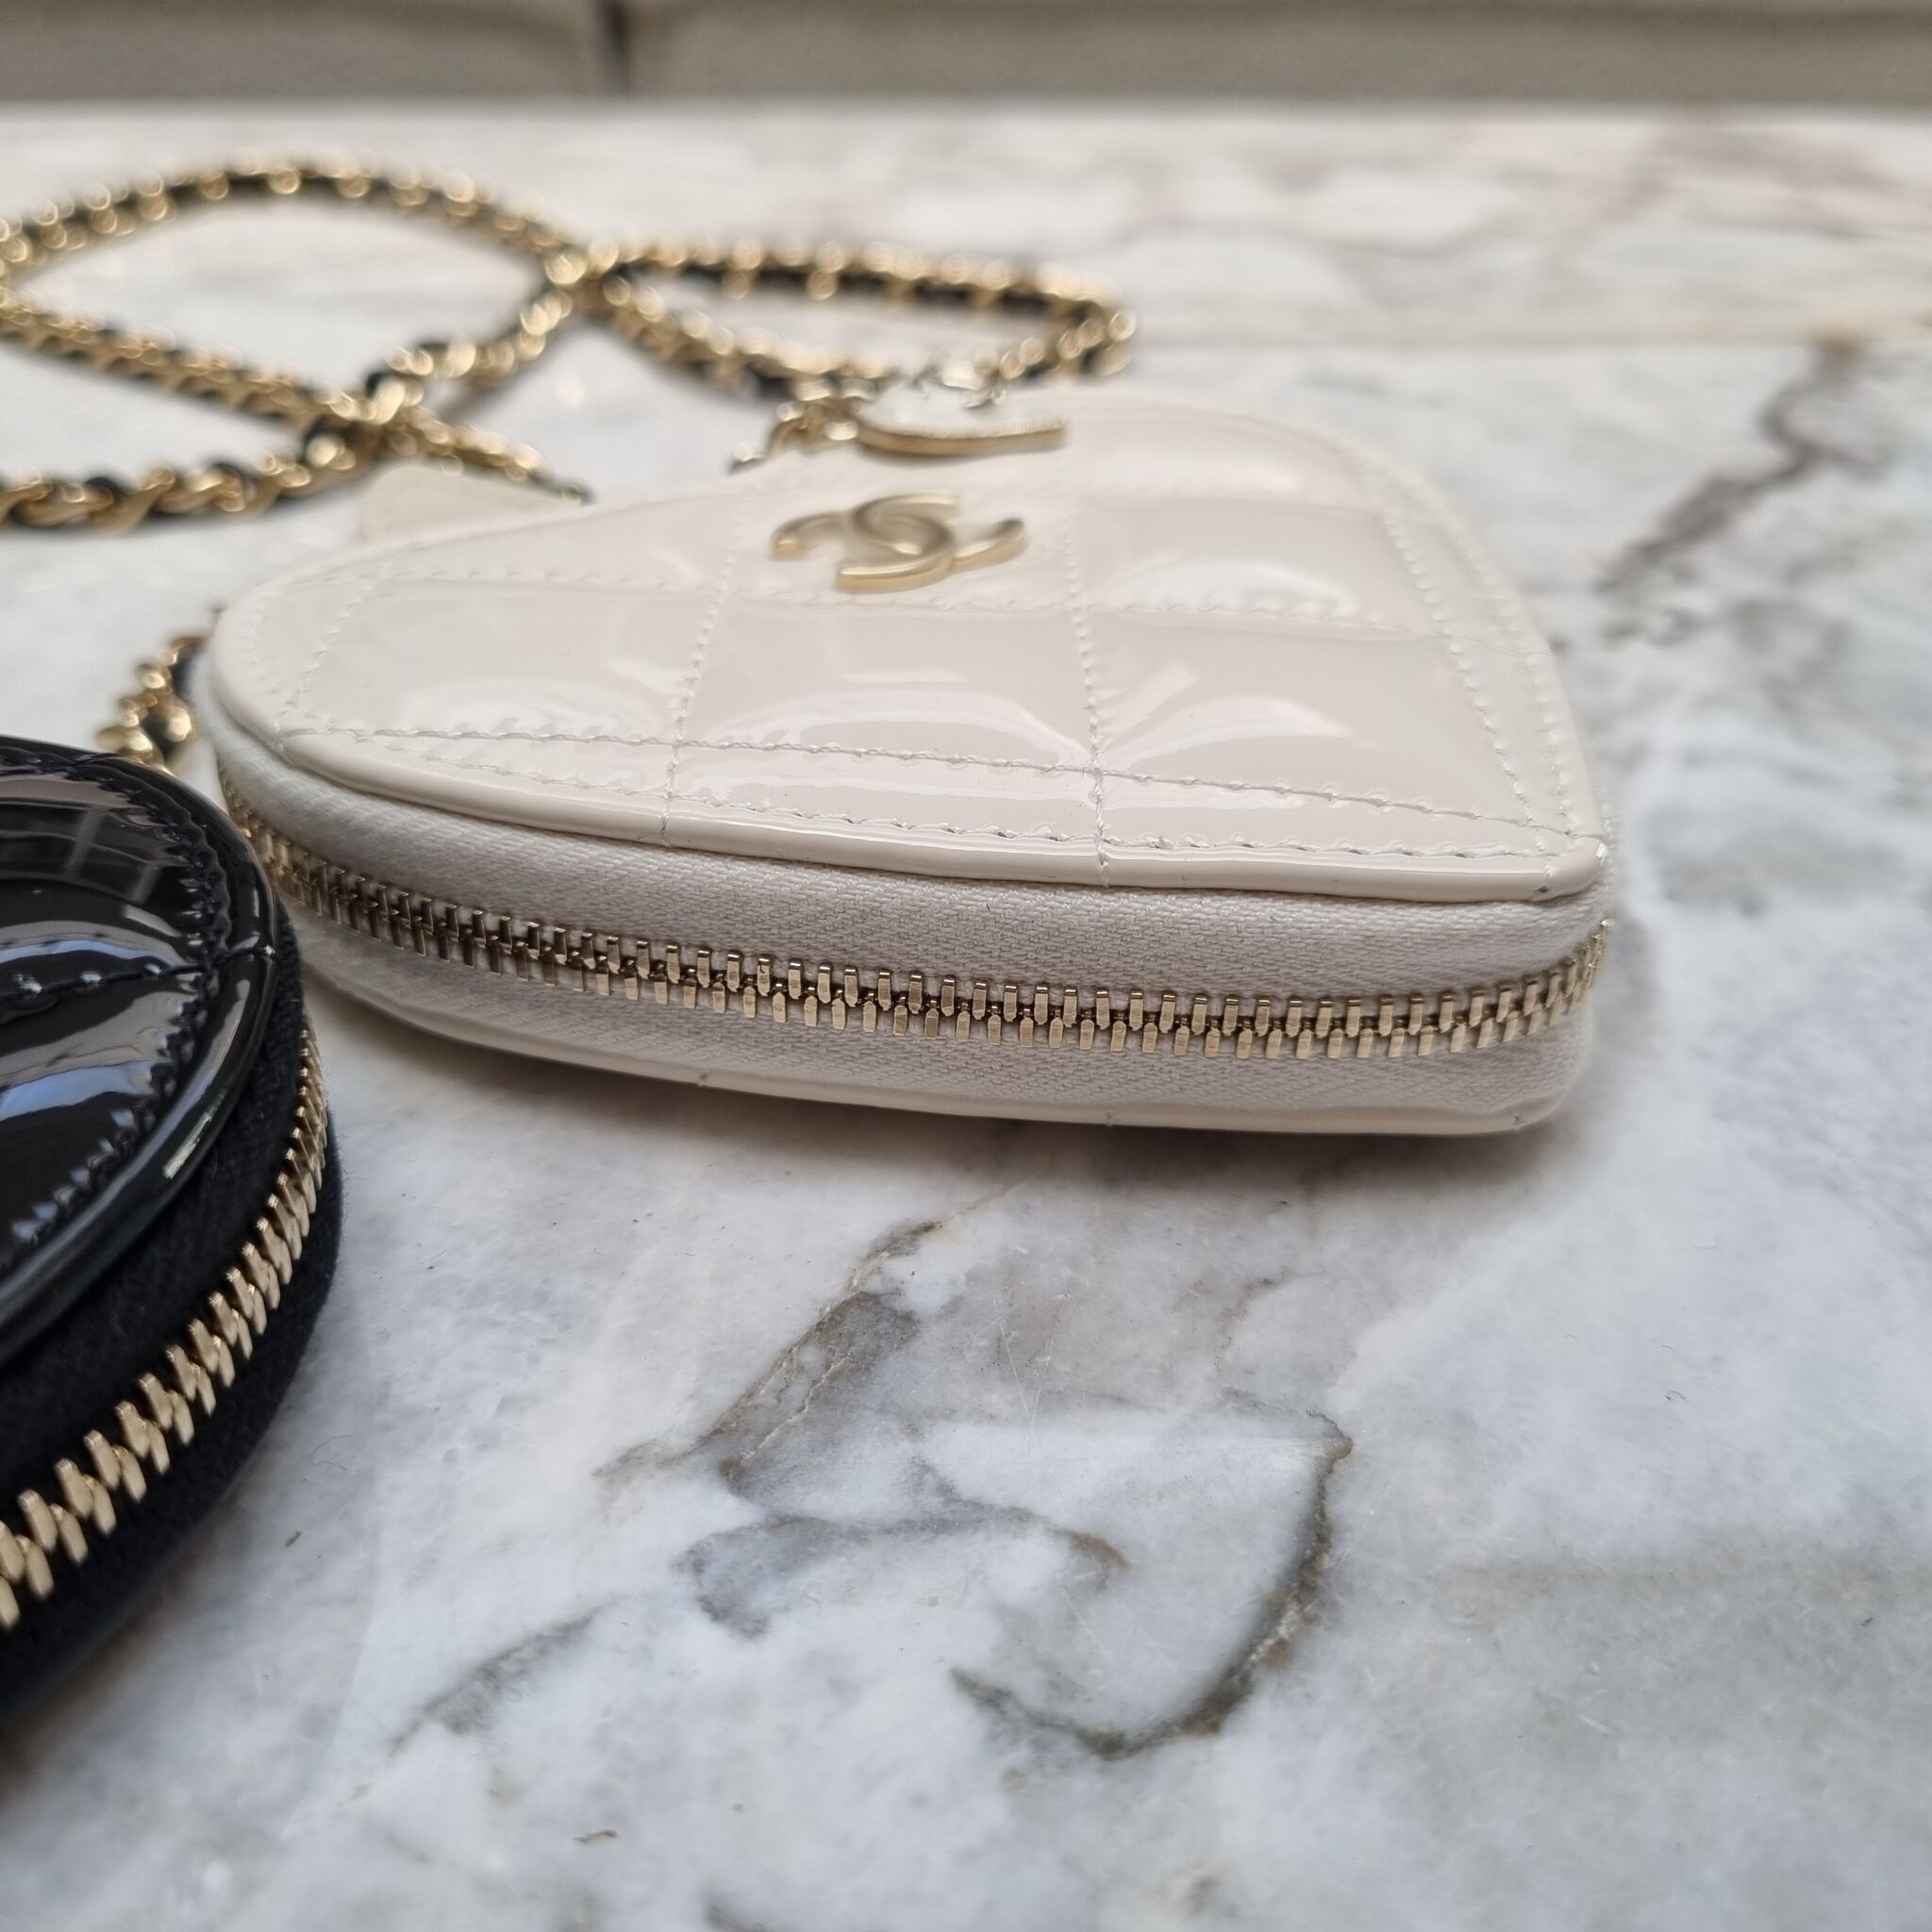 Chanel Heart Clutch With Chain, Patent leather, Black/White GHW